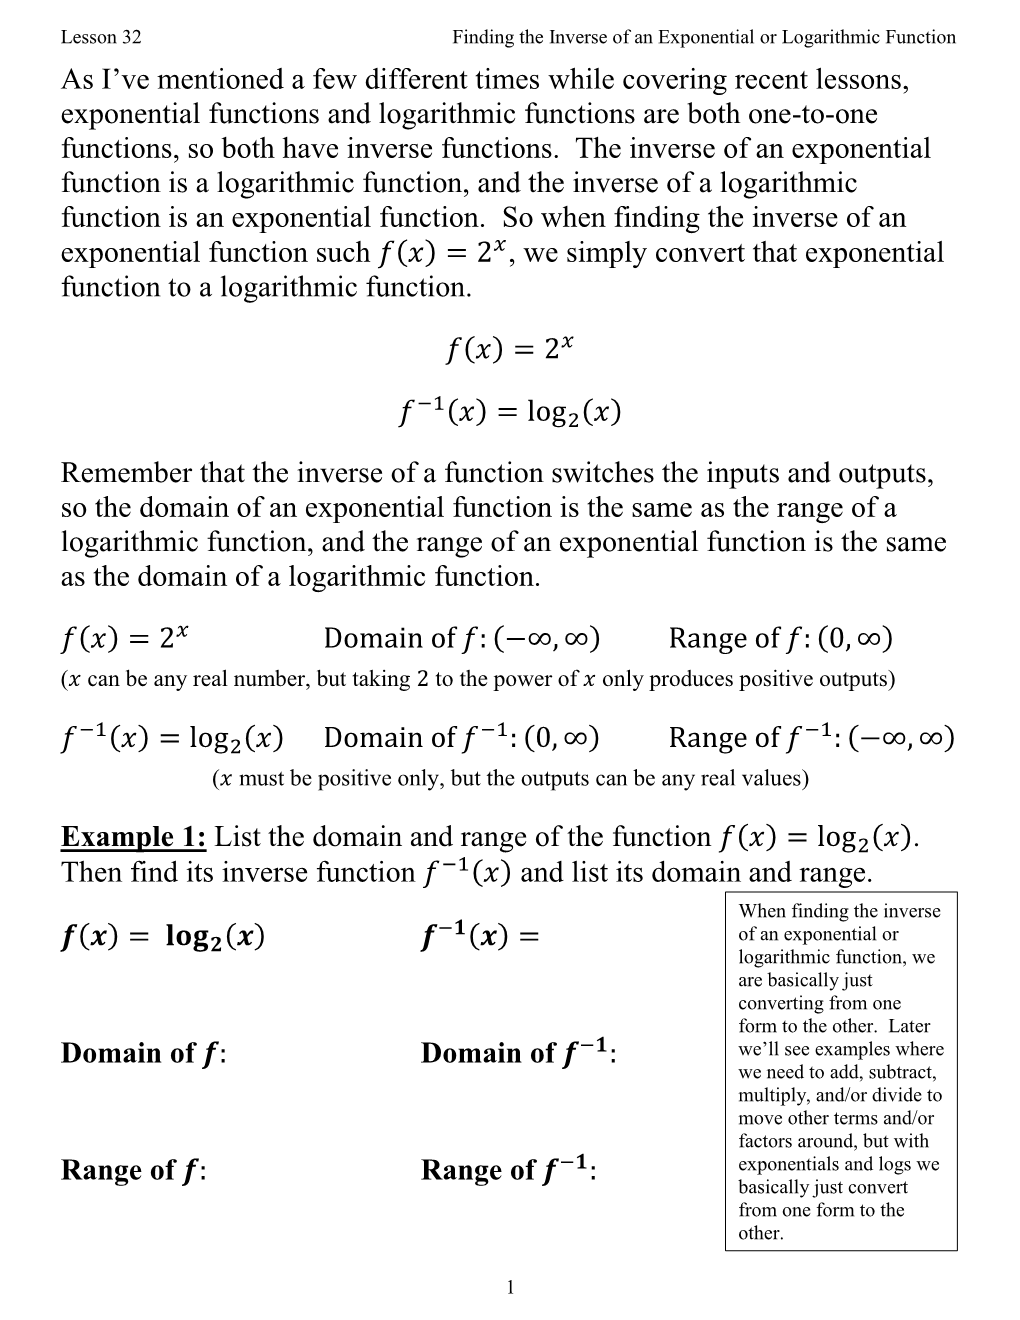 Finding the Inverse of an Exponential Or Logarithmic Function